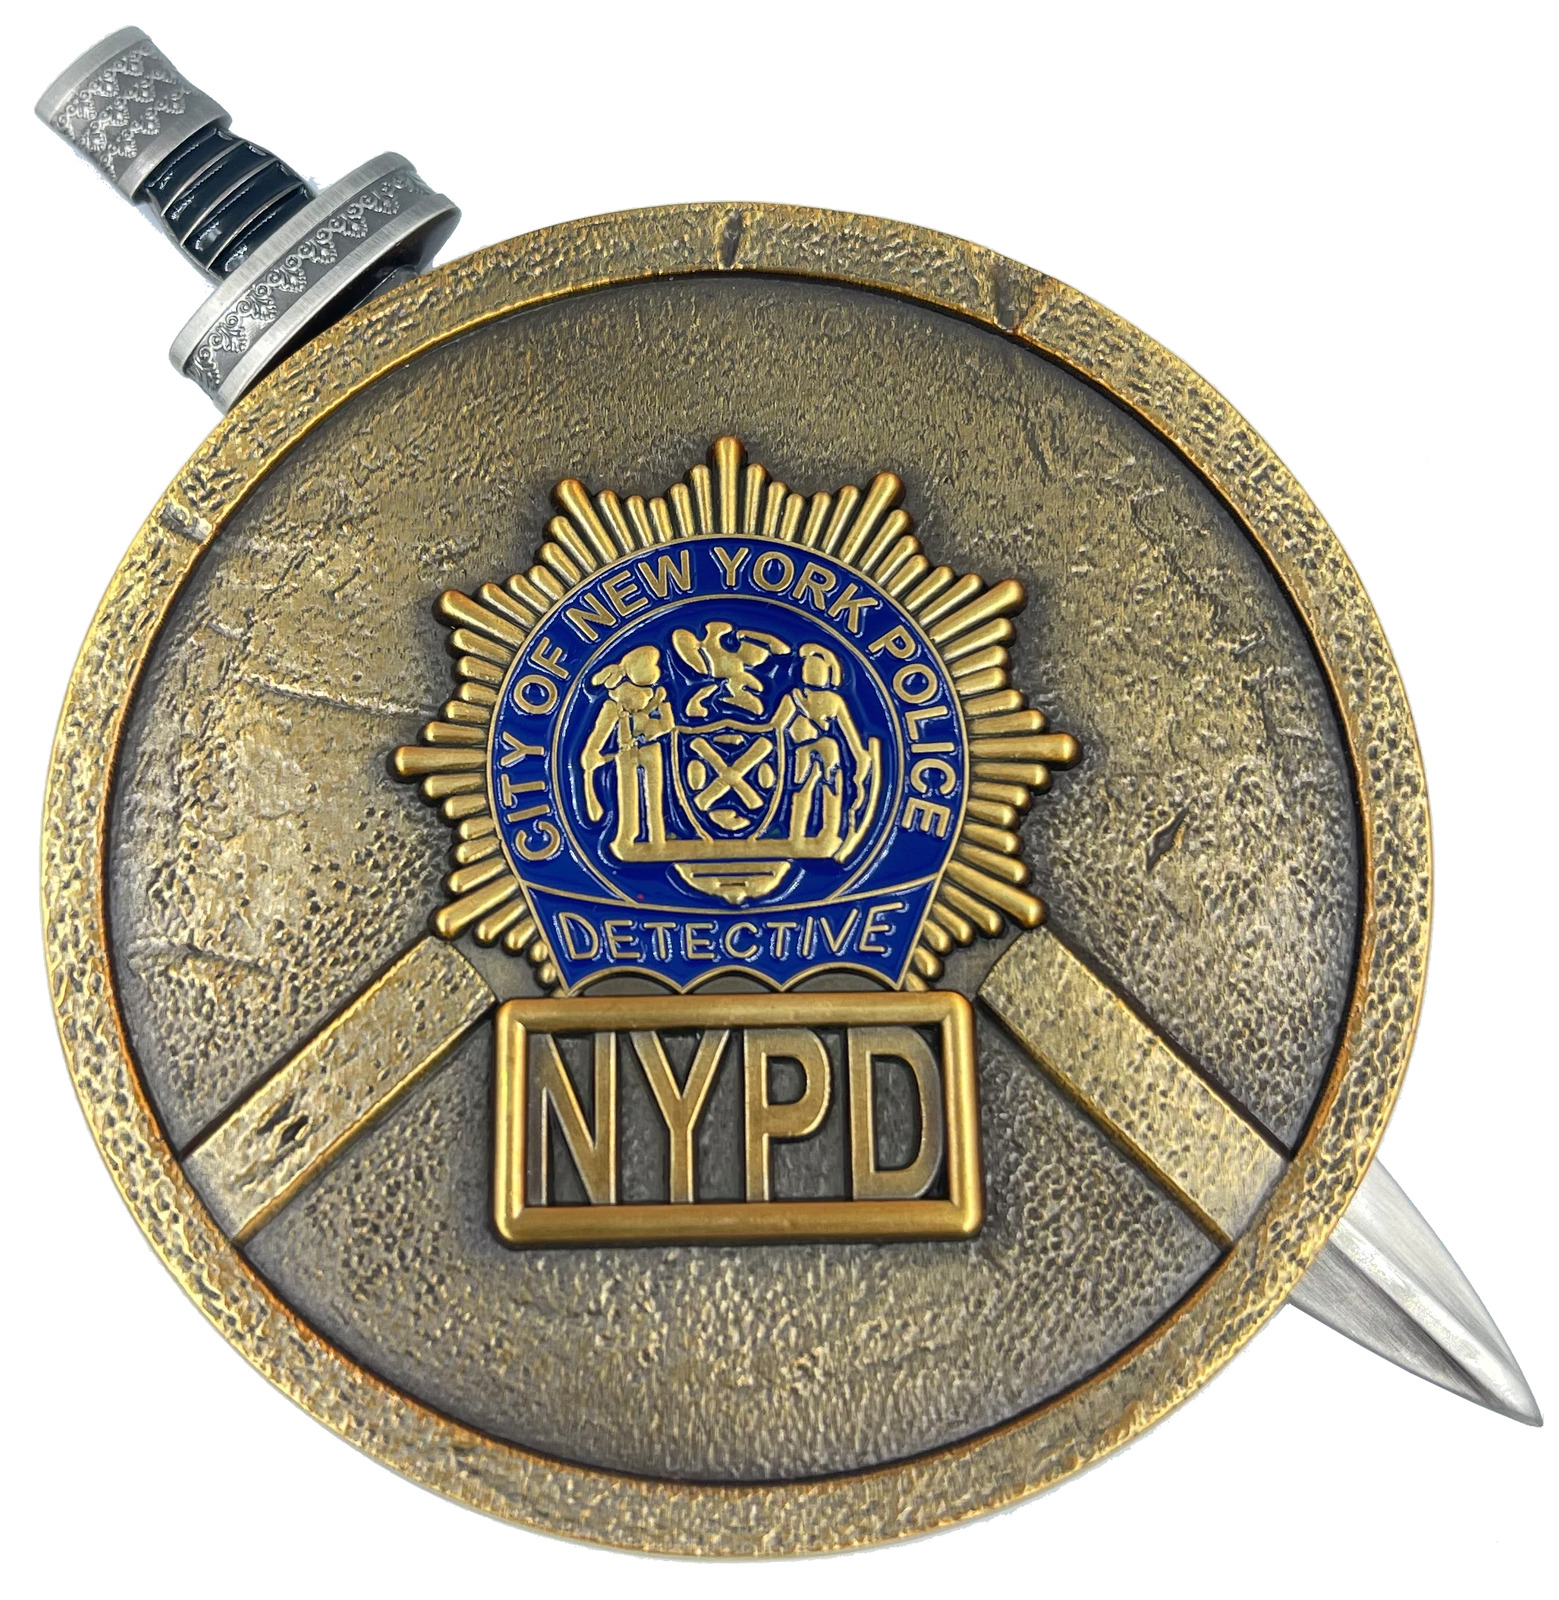 BL4-008 NYPD New York City Police Department Detective Shield with removable Swo